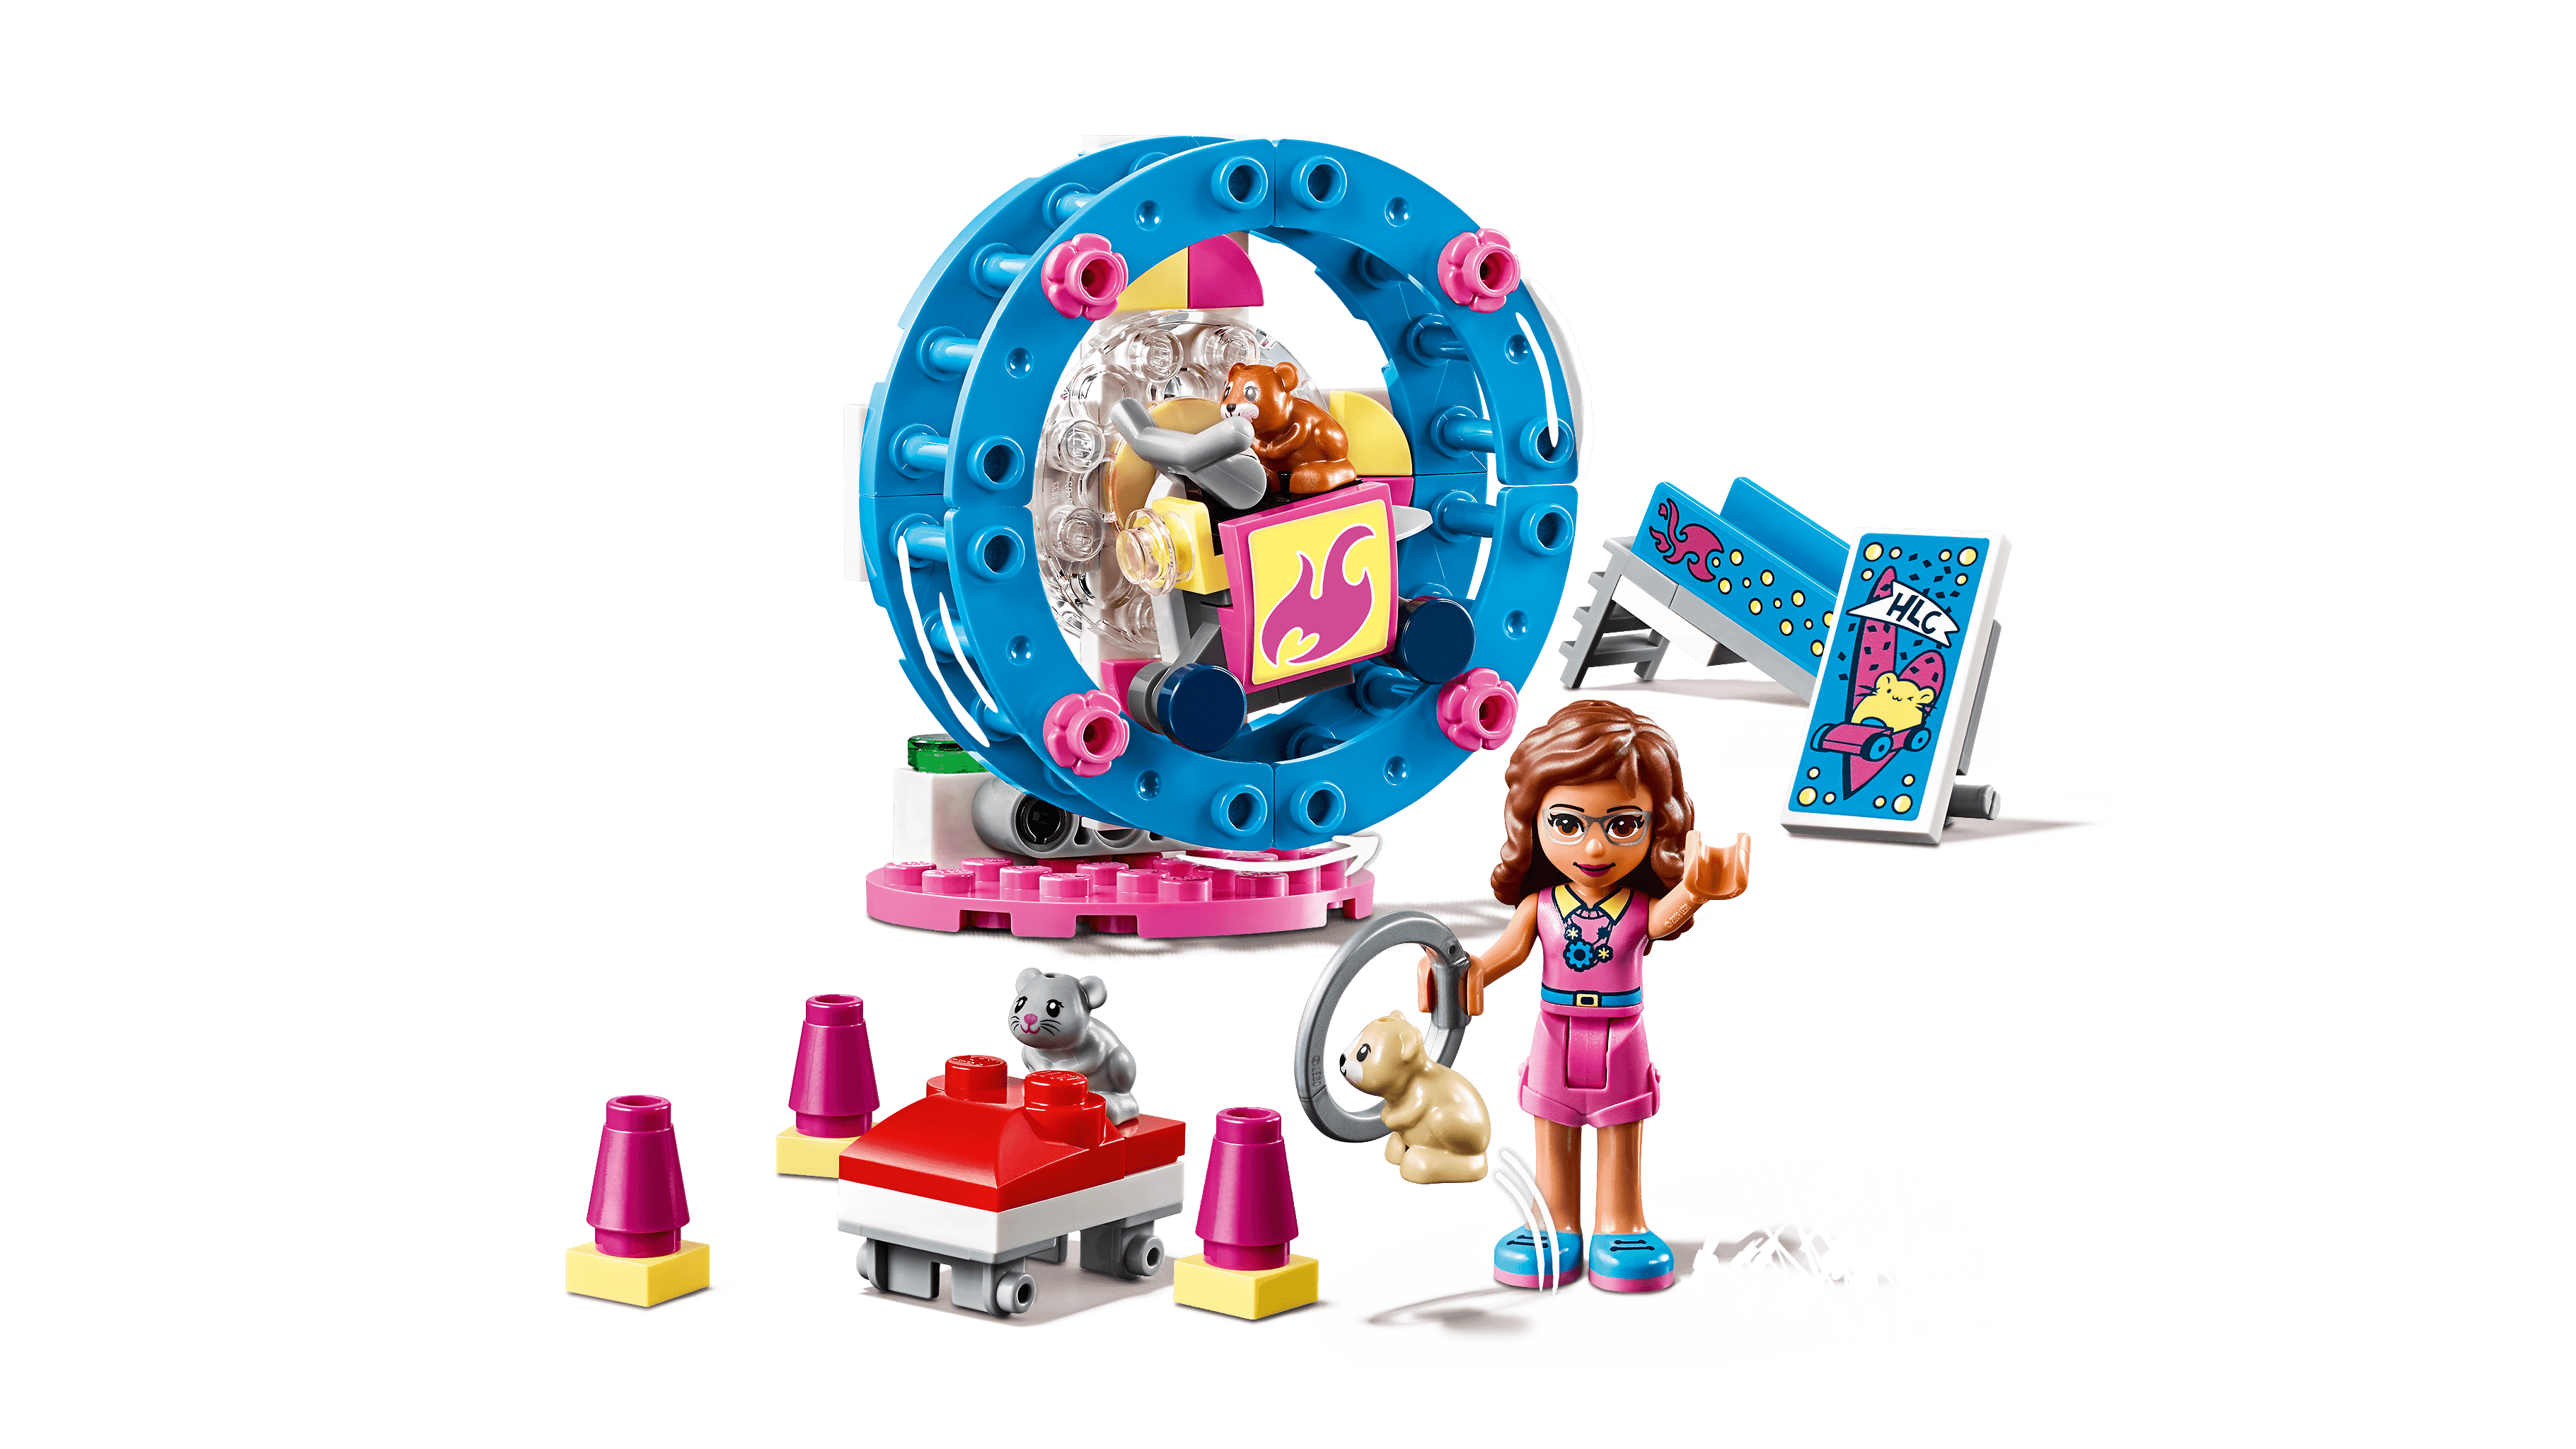 LEGO Friends Olivia's Hamster Playground 41383 9 (81 Pieces) - image 7 of 8